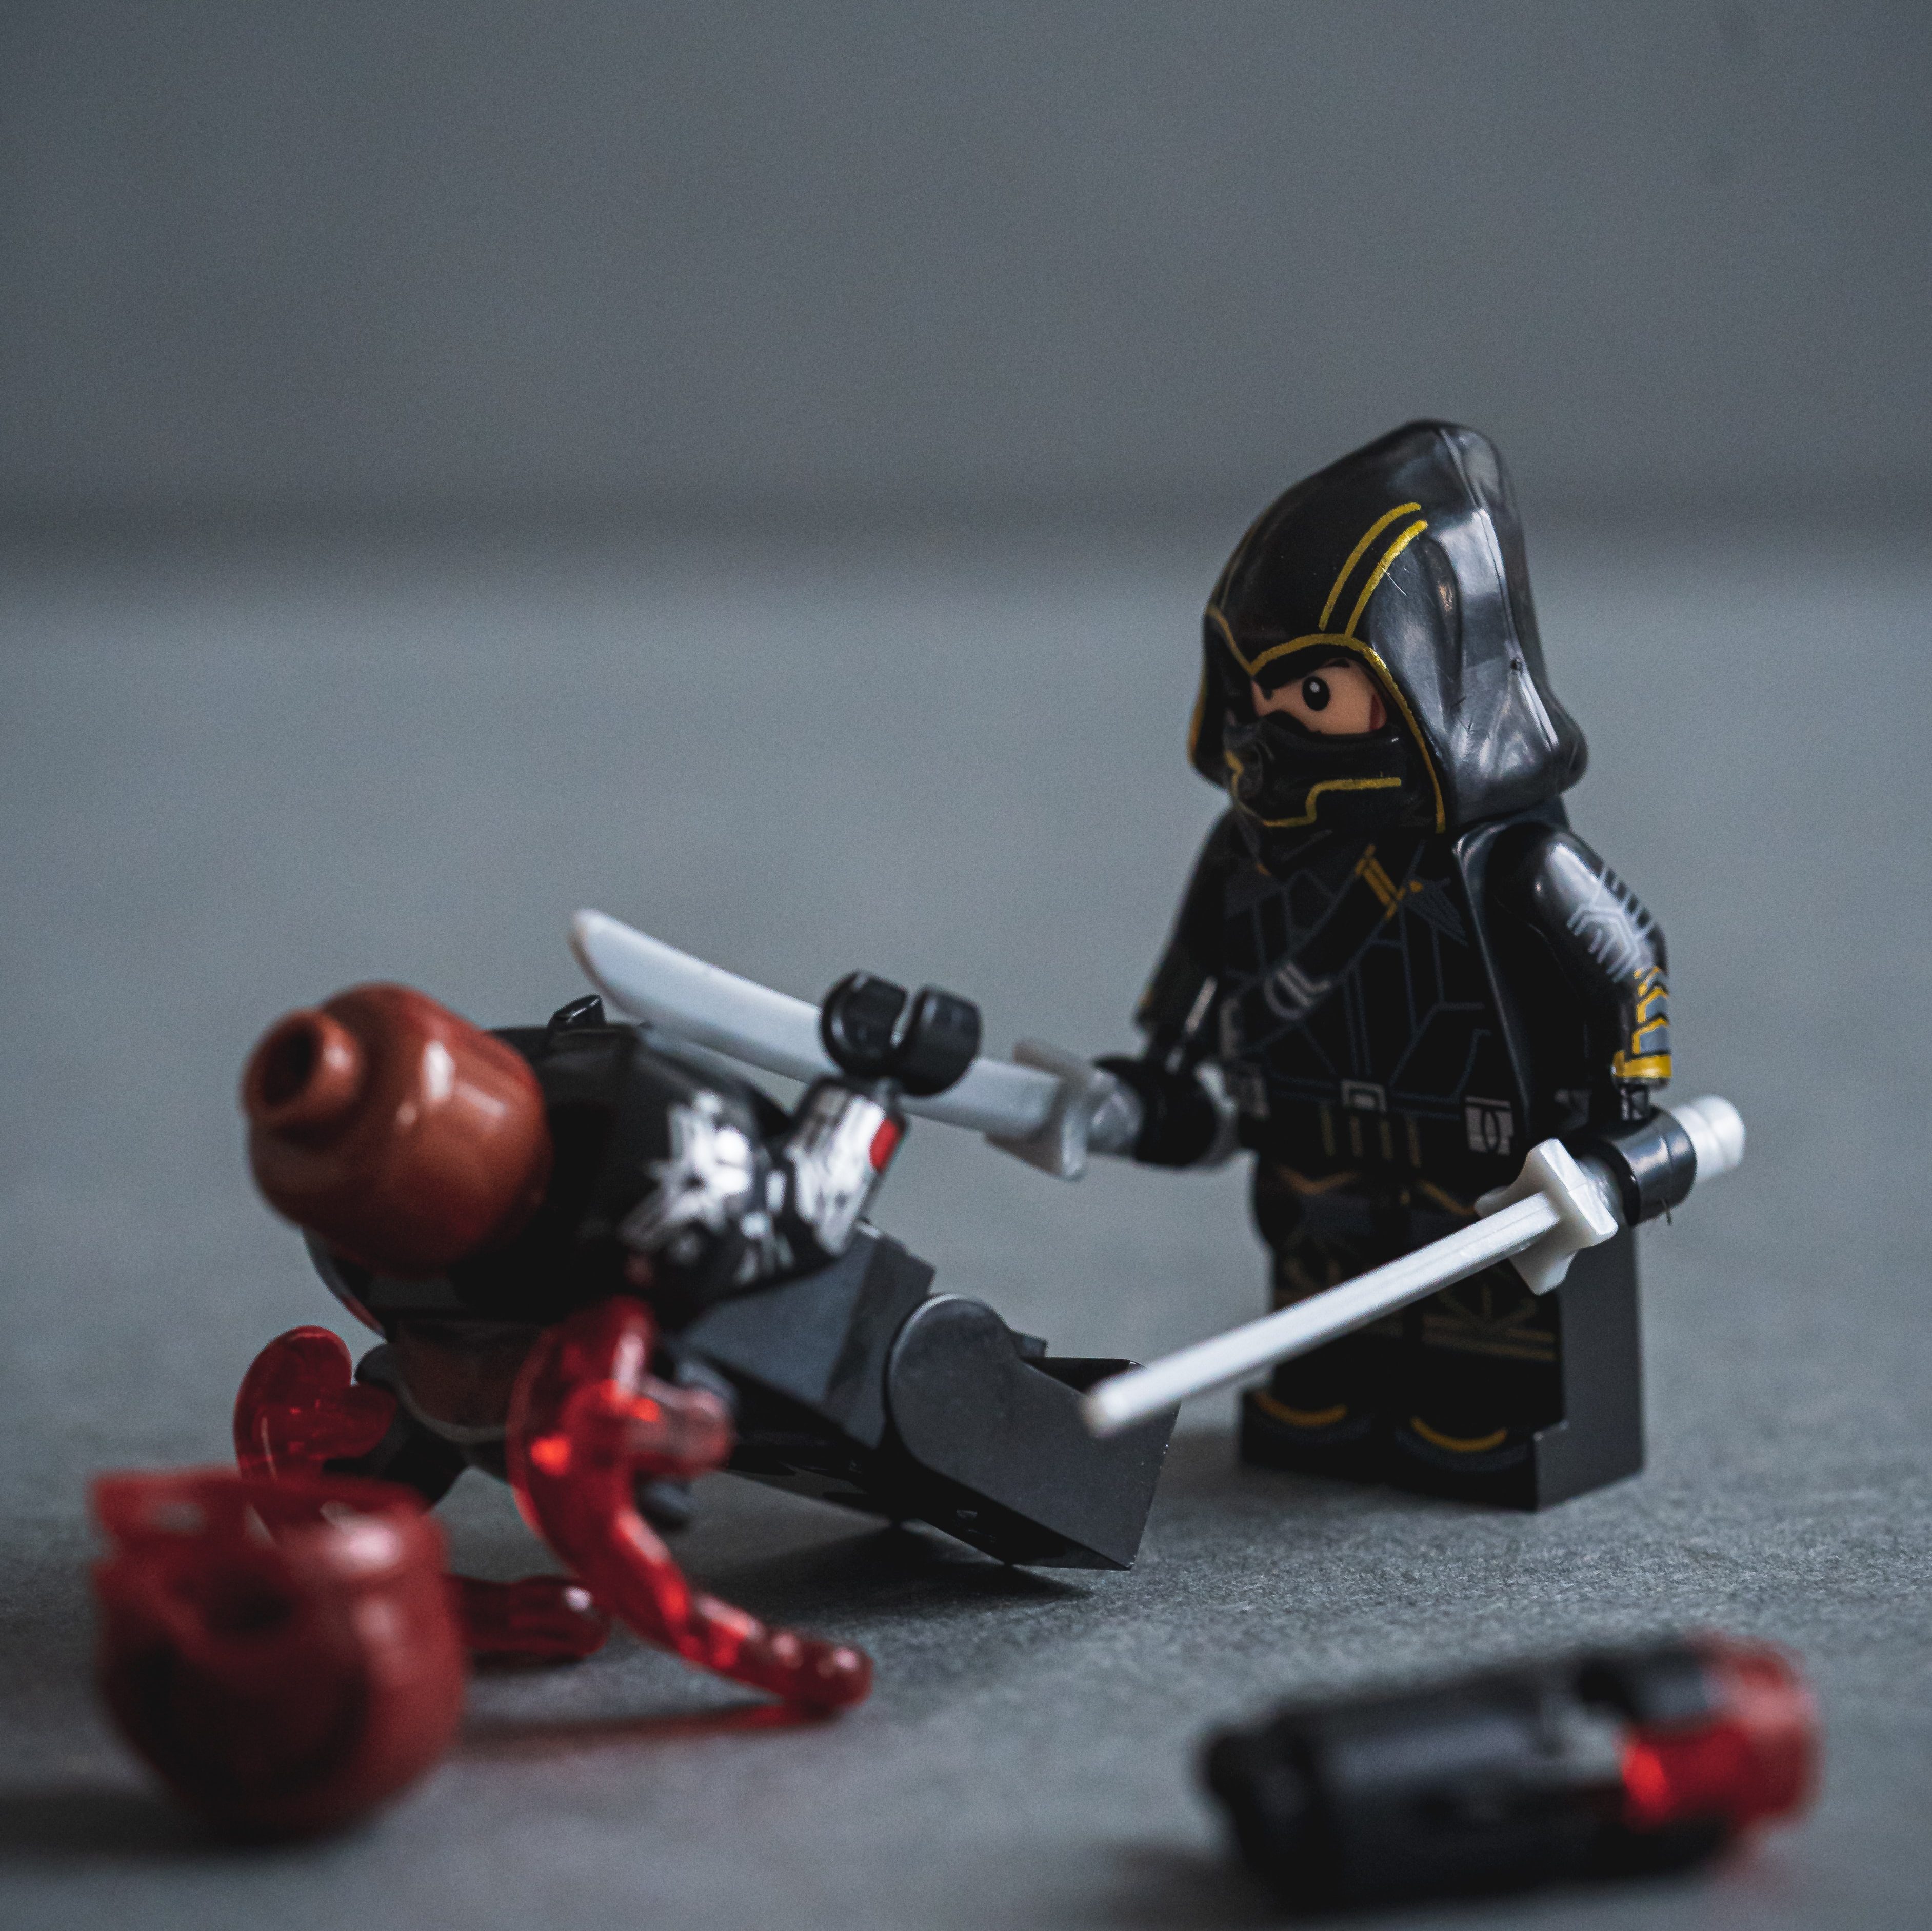 Two lego knights battle it out. 